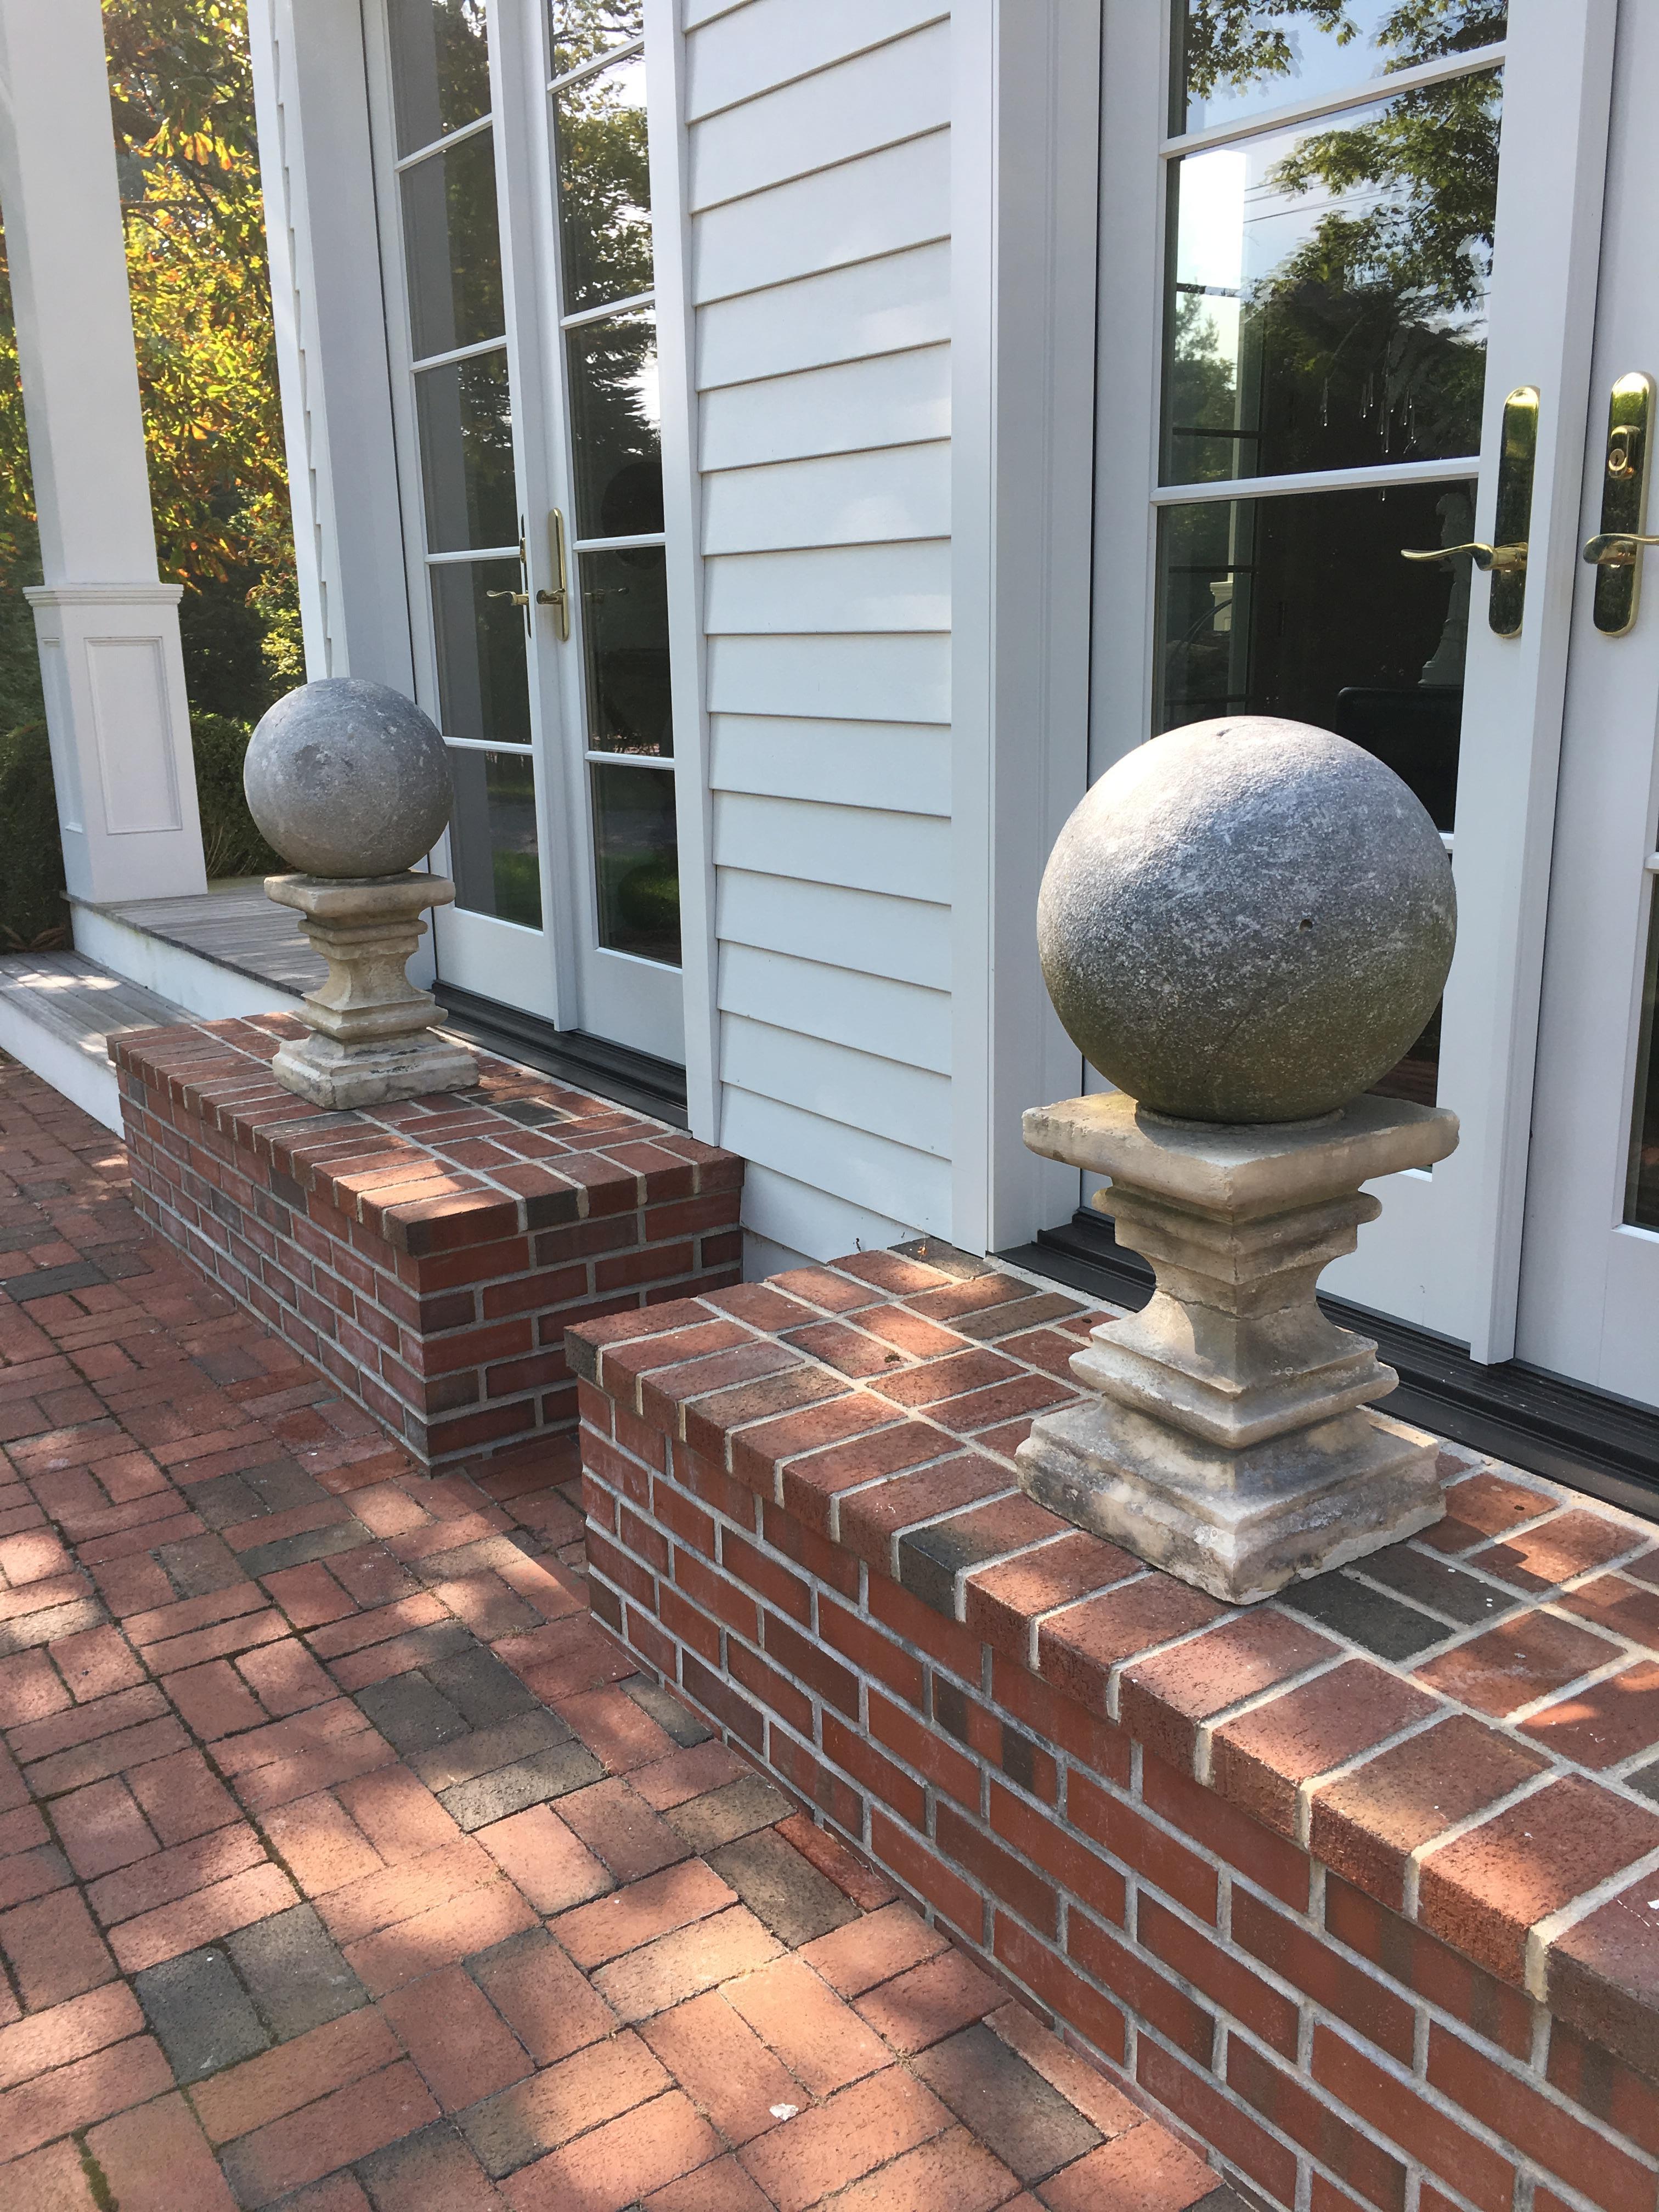 cast stone pedestals and spheres